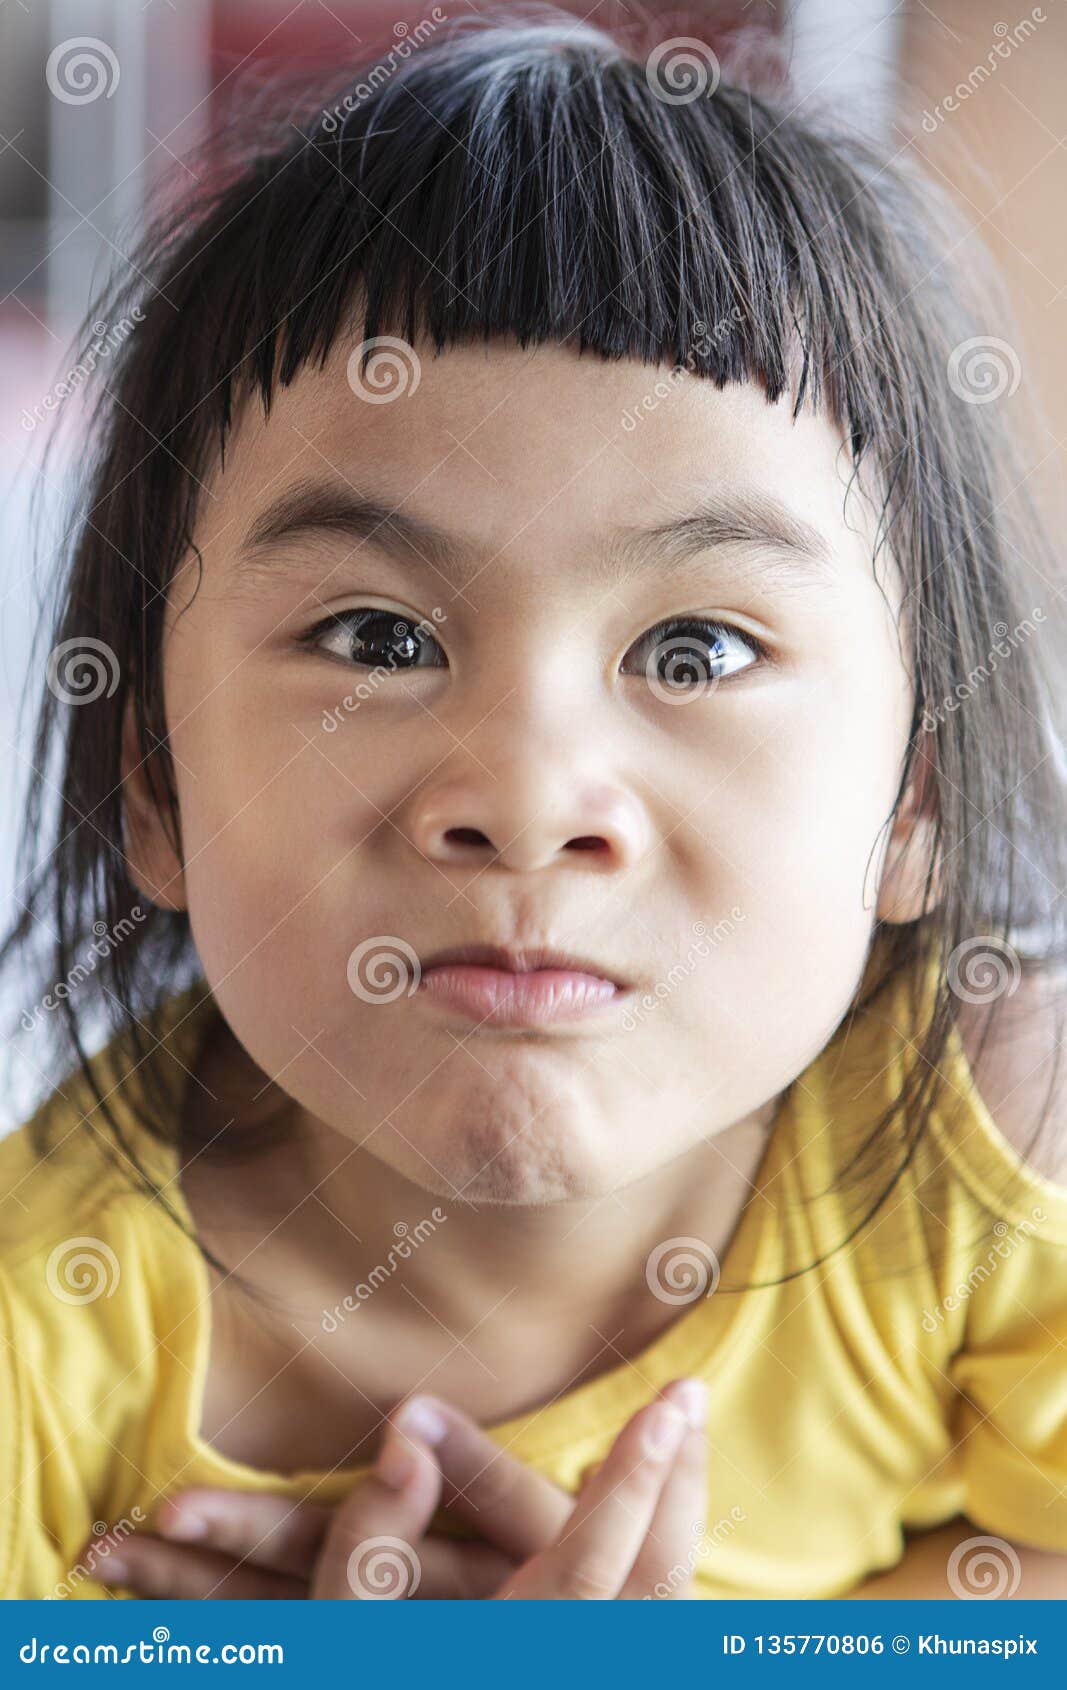 Funny Face of Asian Lovely Children Stock Photo - Image of eyes, comedy ...